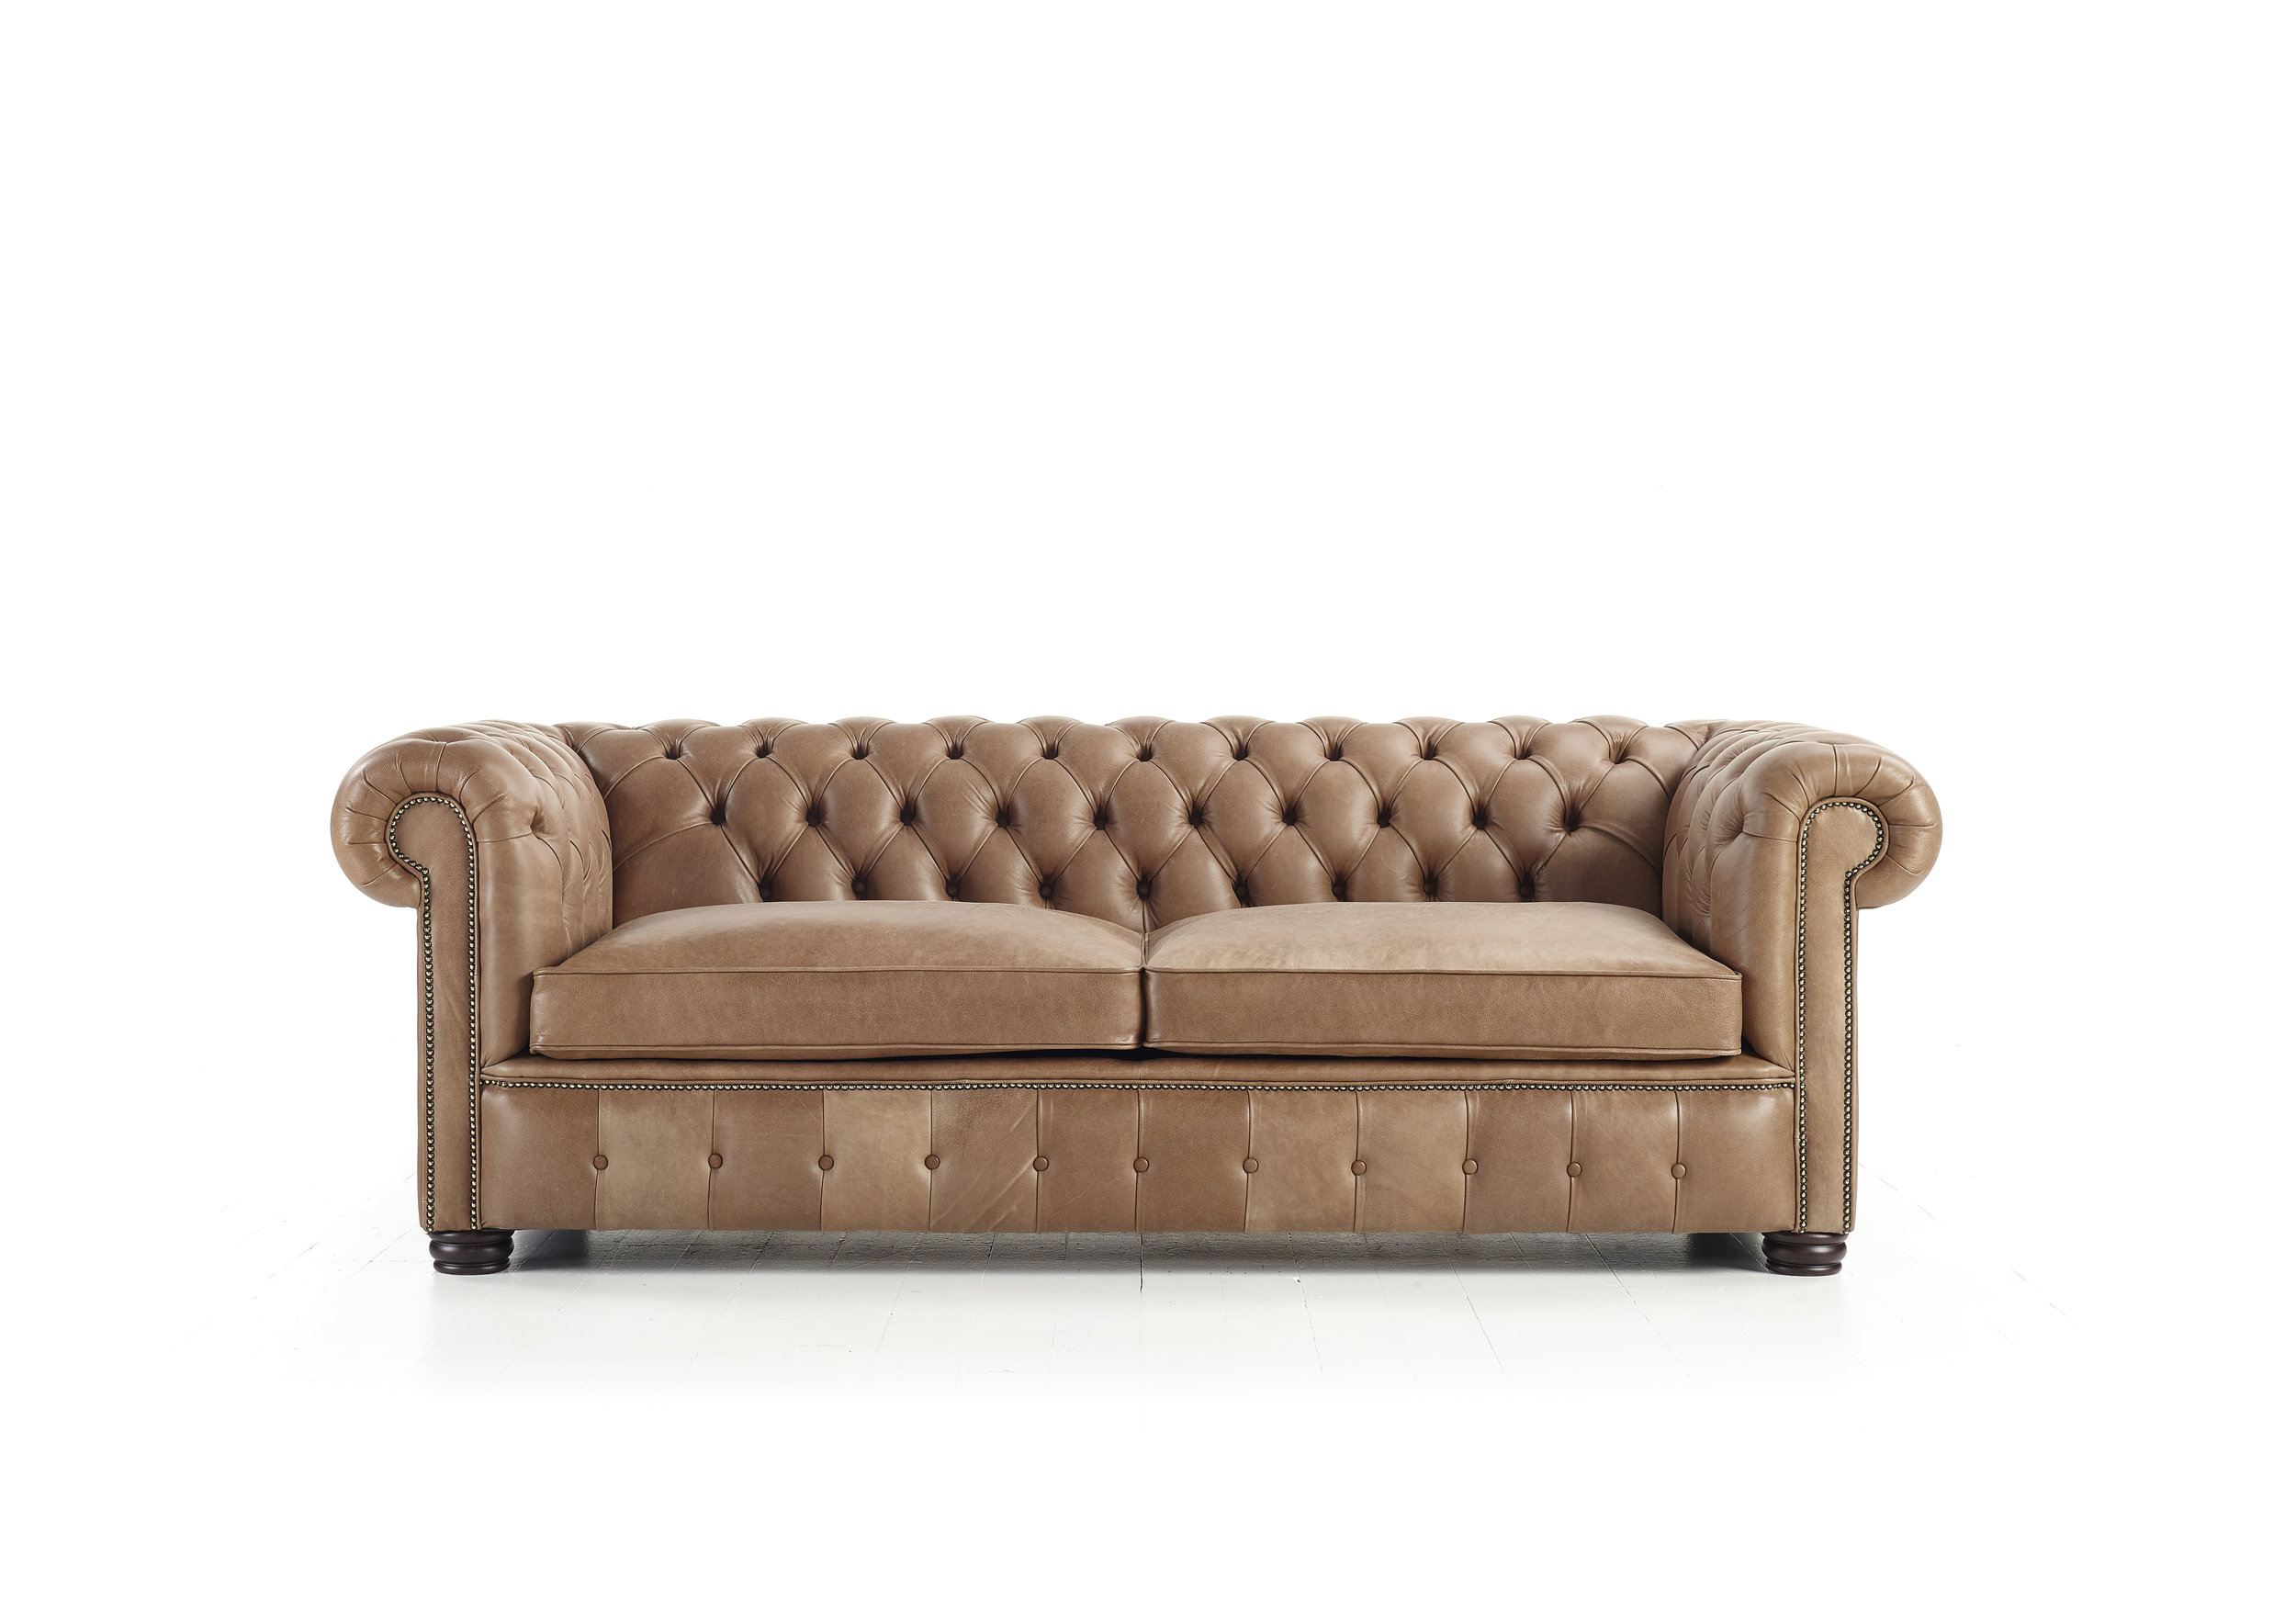 Sofa From Distinctive Chesterfields